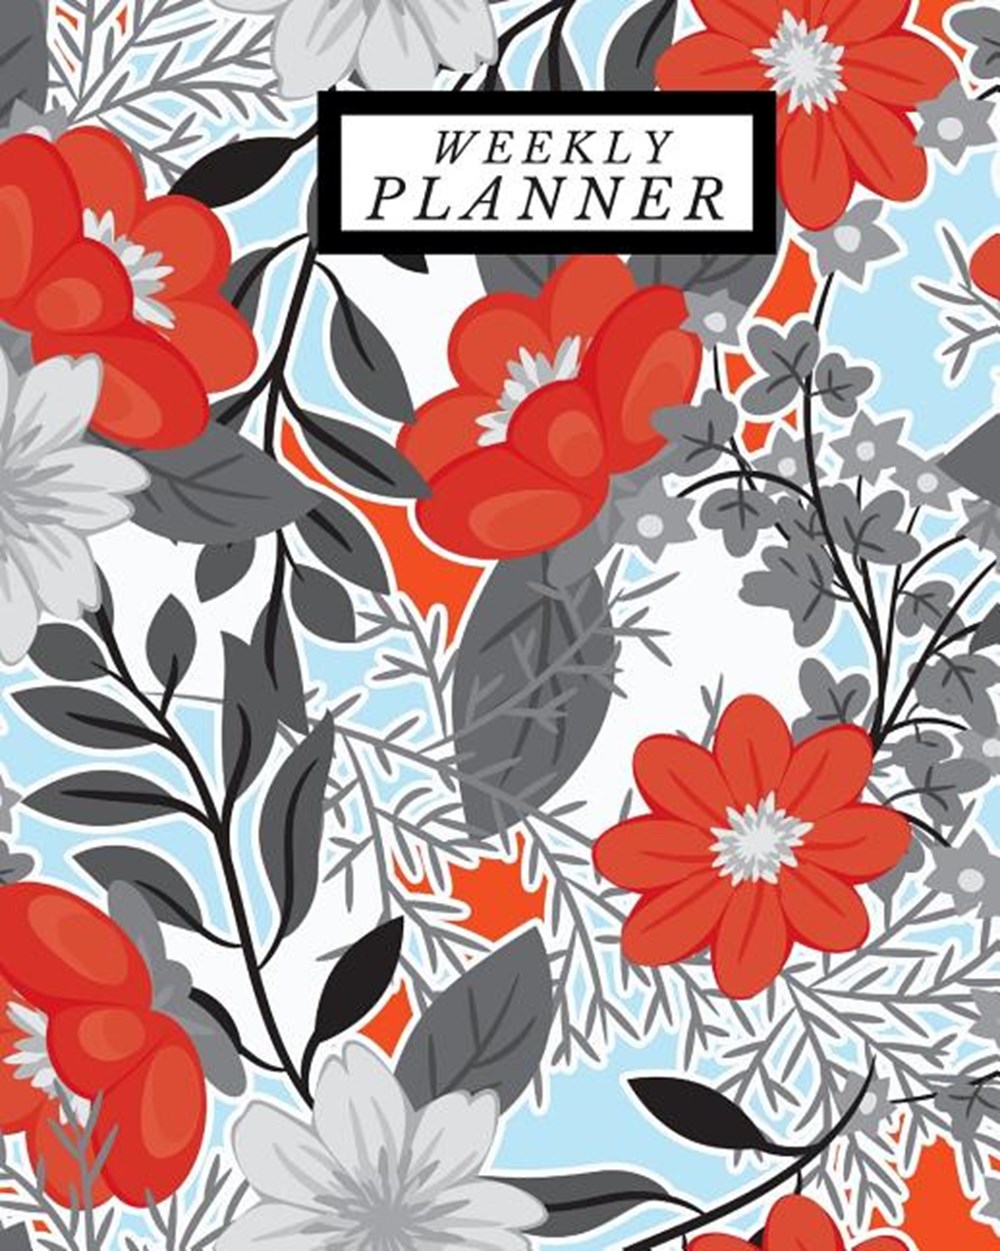 Weekly planner Daily & Weekly Productivity Planner At-A-Glance Weekly Diary Schedule Undated Diary O